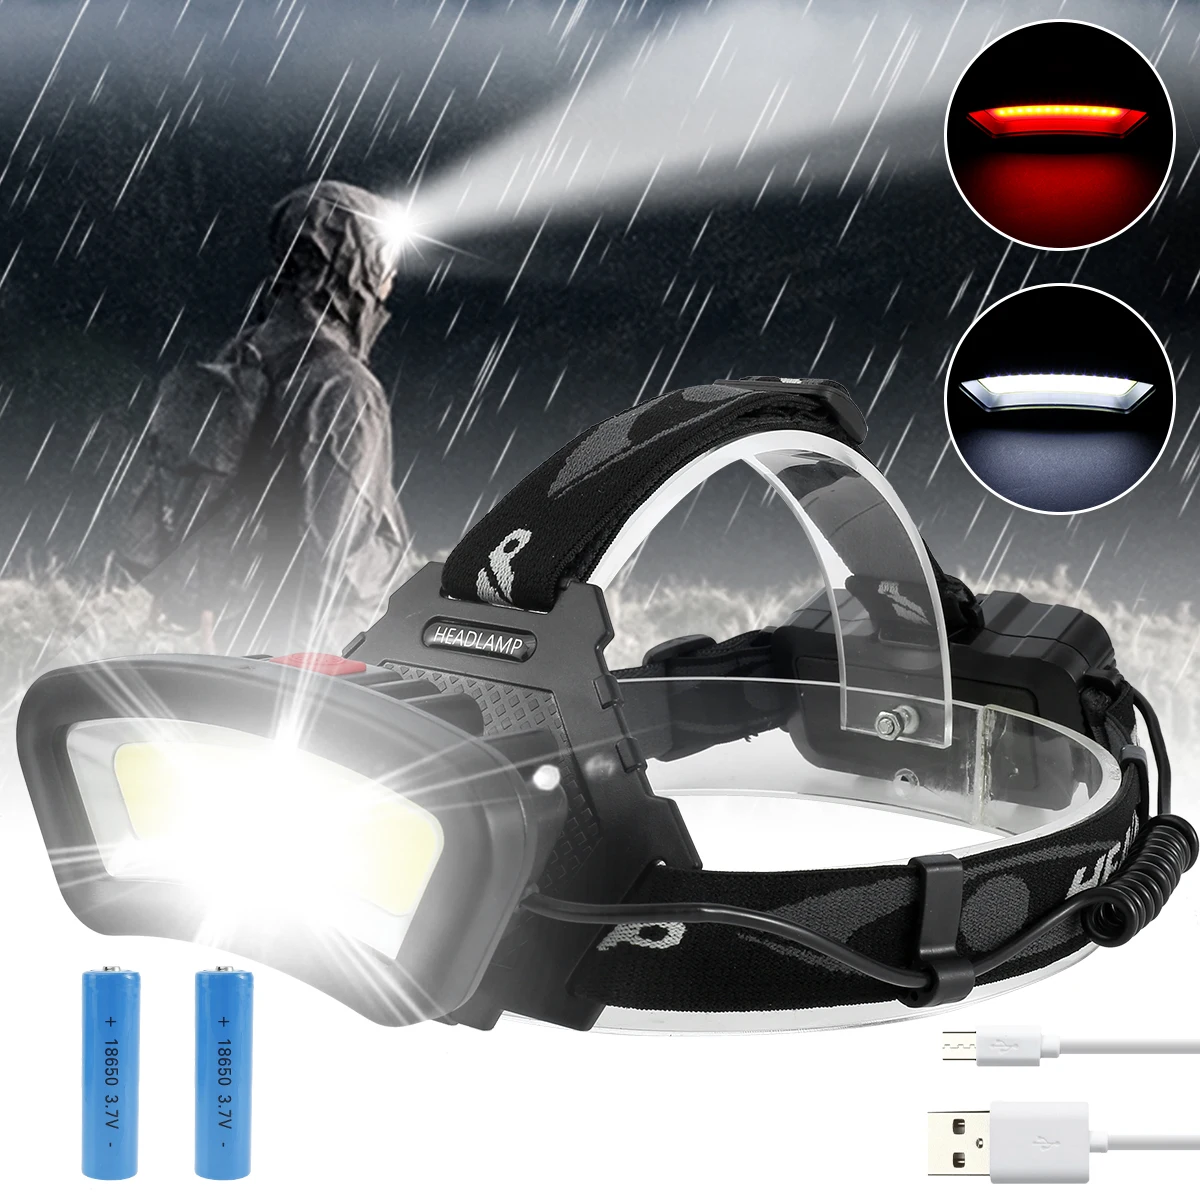 

New LED Headlamp 500LM 10W USB Rechargeable COB Headlight w/18650 Battery 4 Lighting Modes 90°Rotation Head Torch IPX4